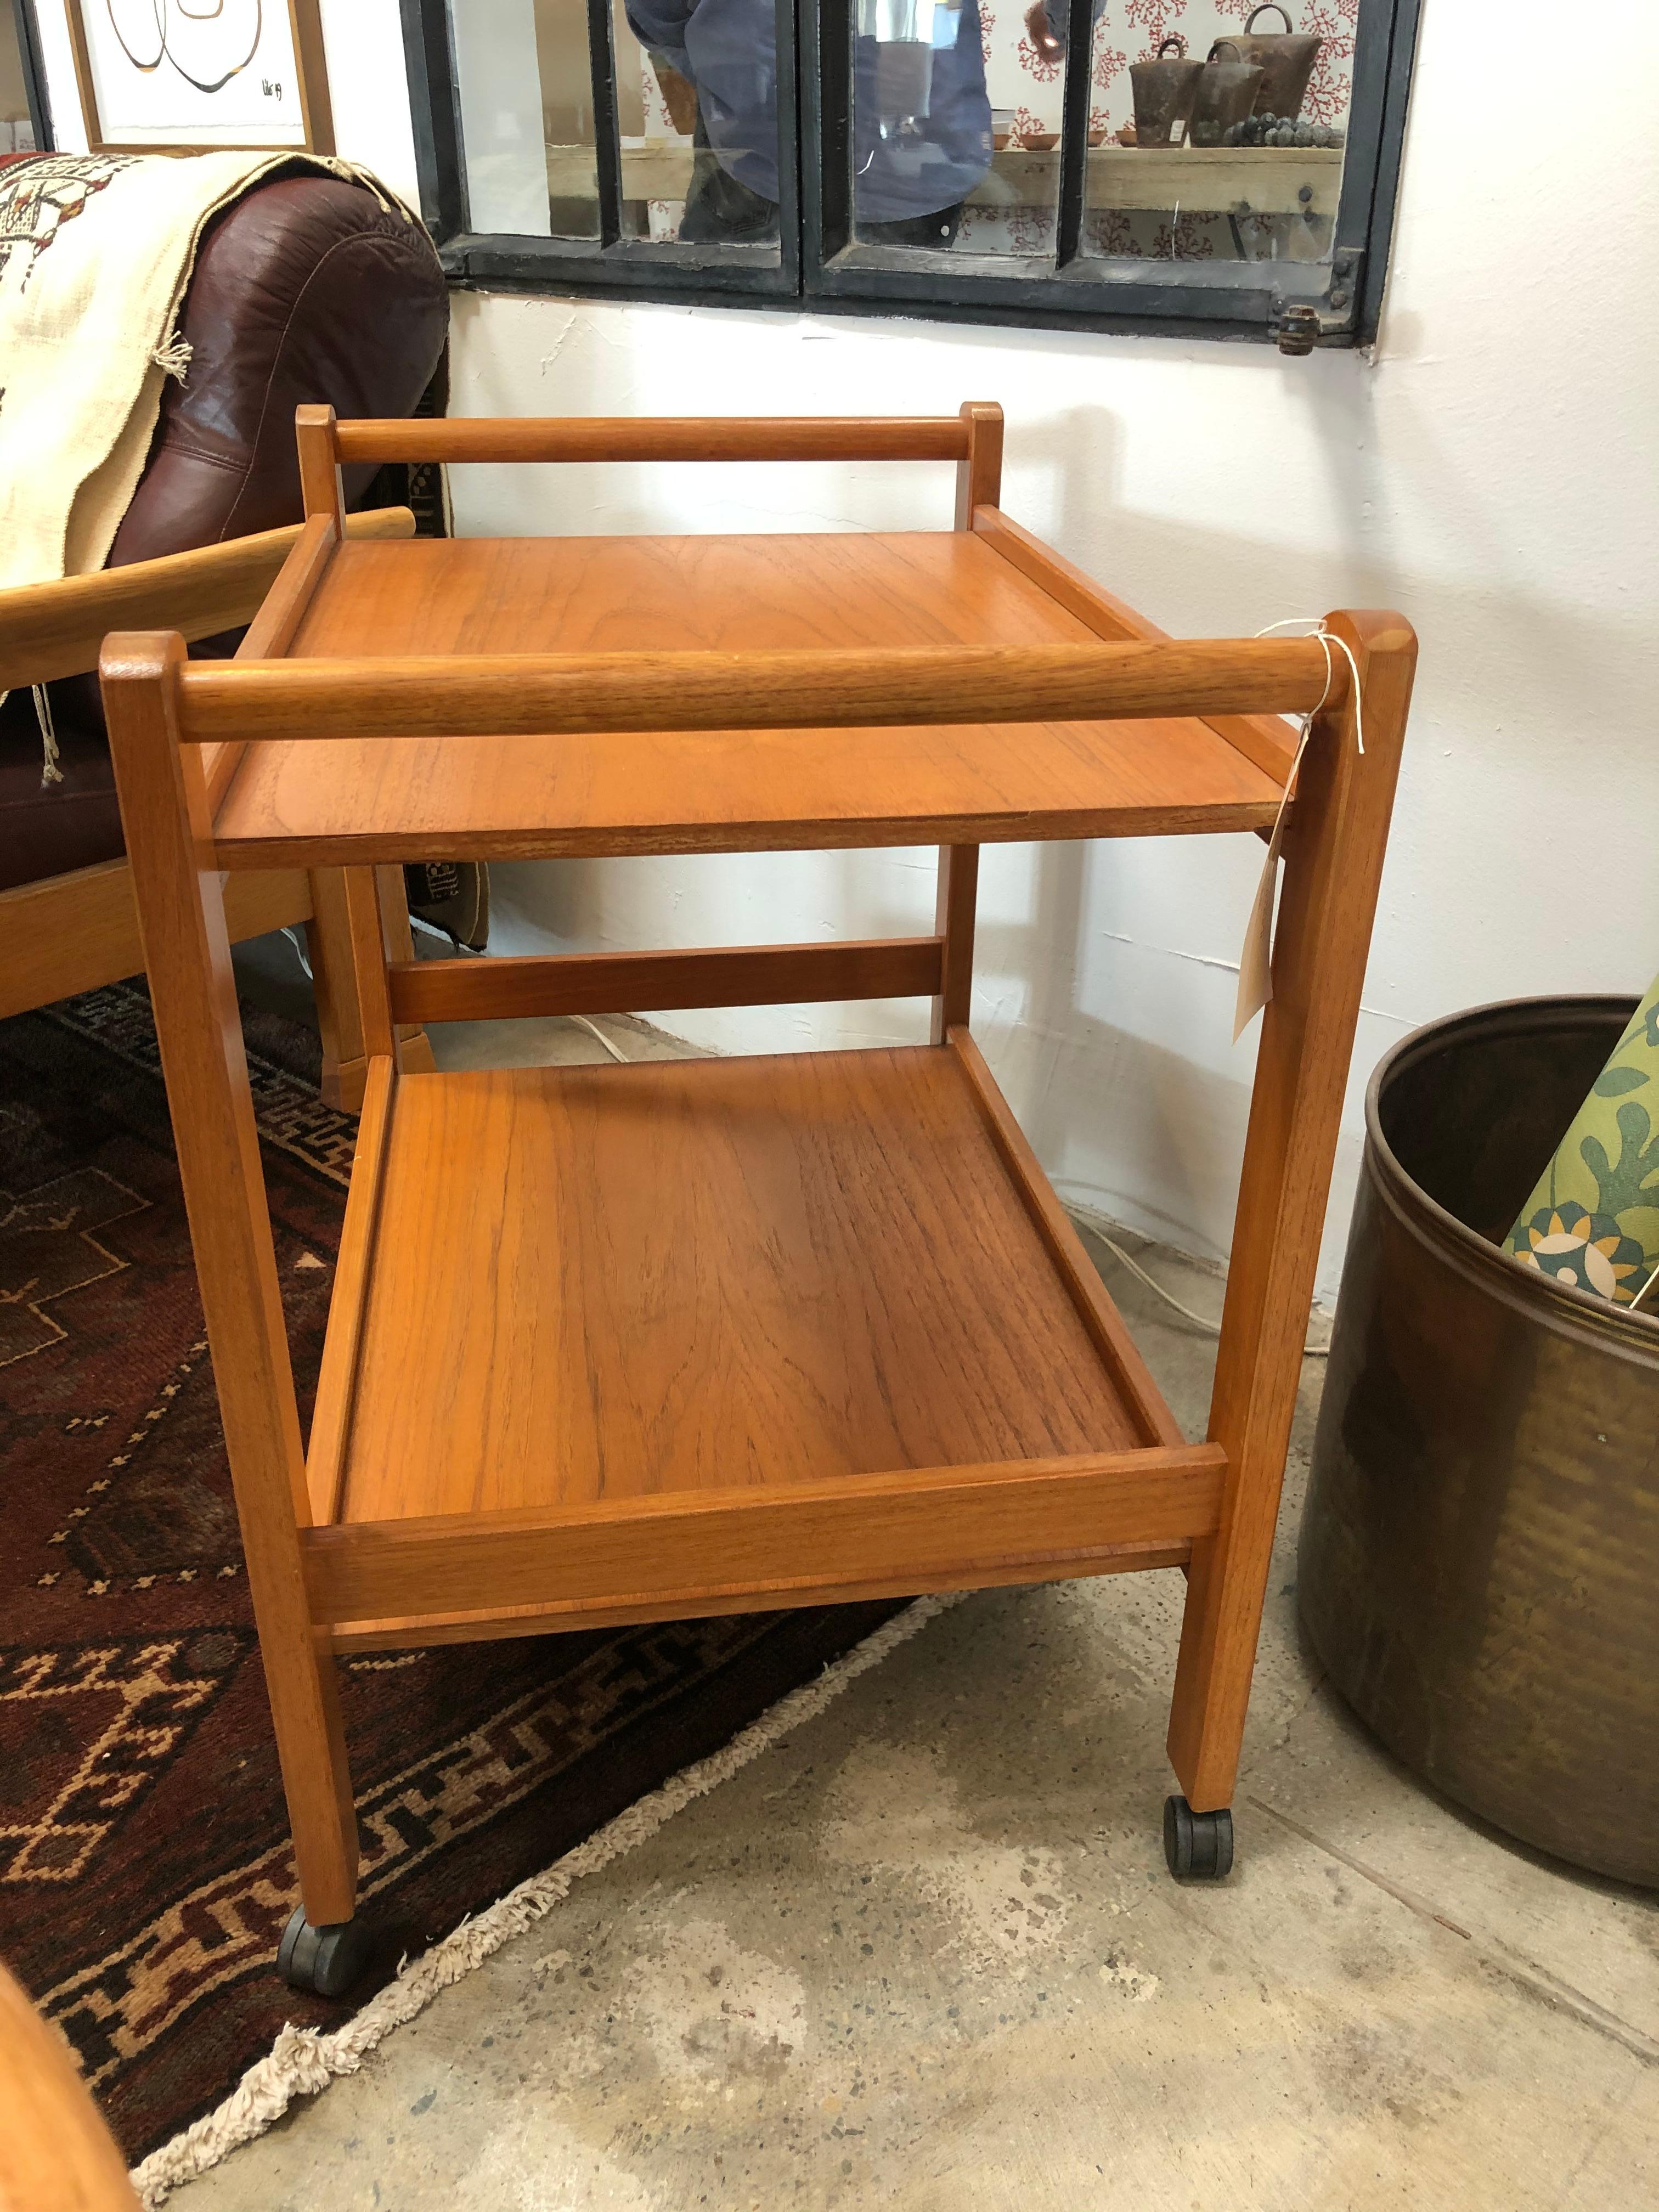 This Danish bar cart has four small wheels in good condition making it a mobile serving cart. It is in excellent vintage condition and is sturdy enough to serve drinks or use as a plant stand. It features two long handles, one on each side, for ease